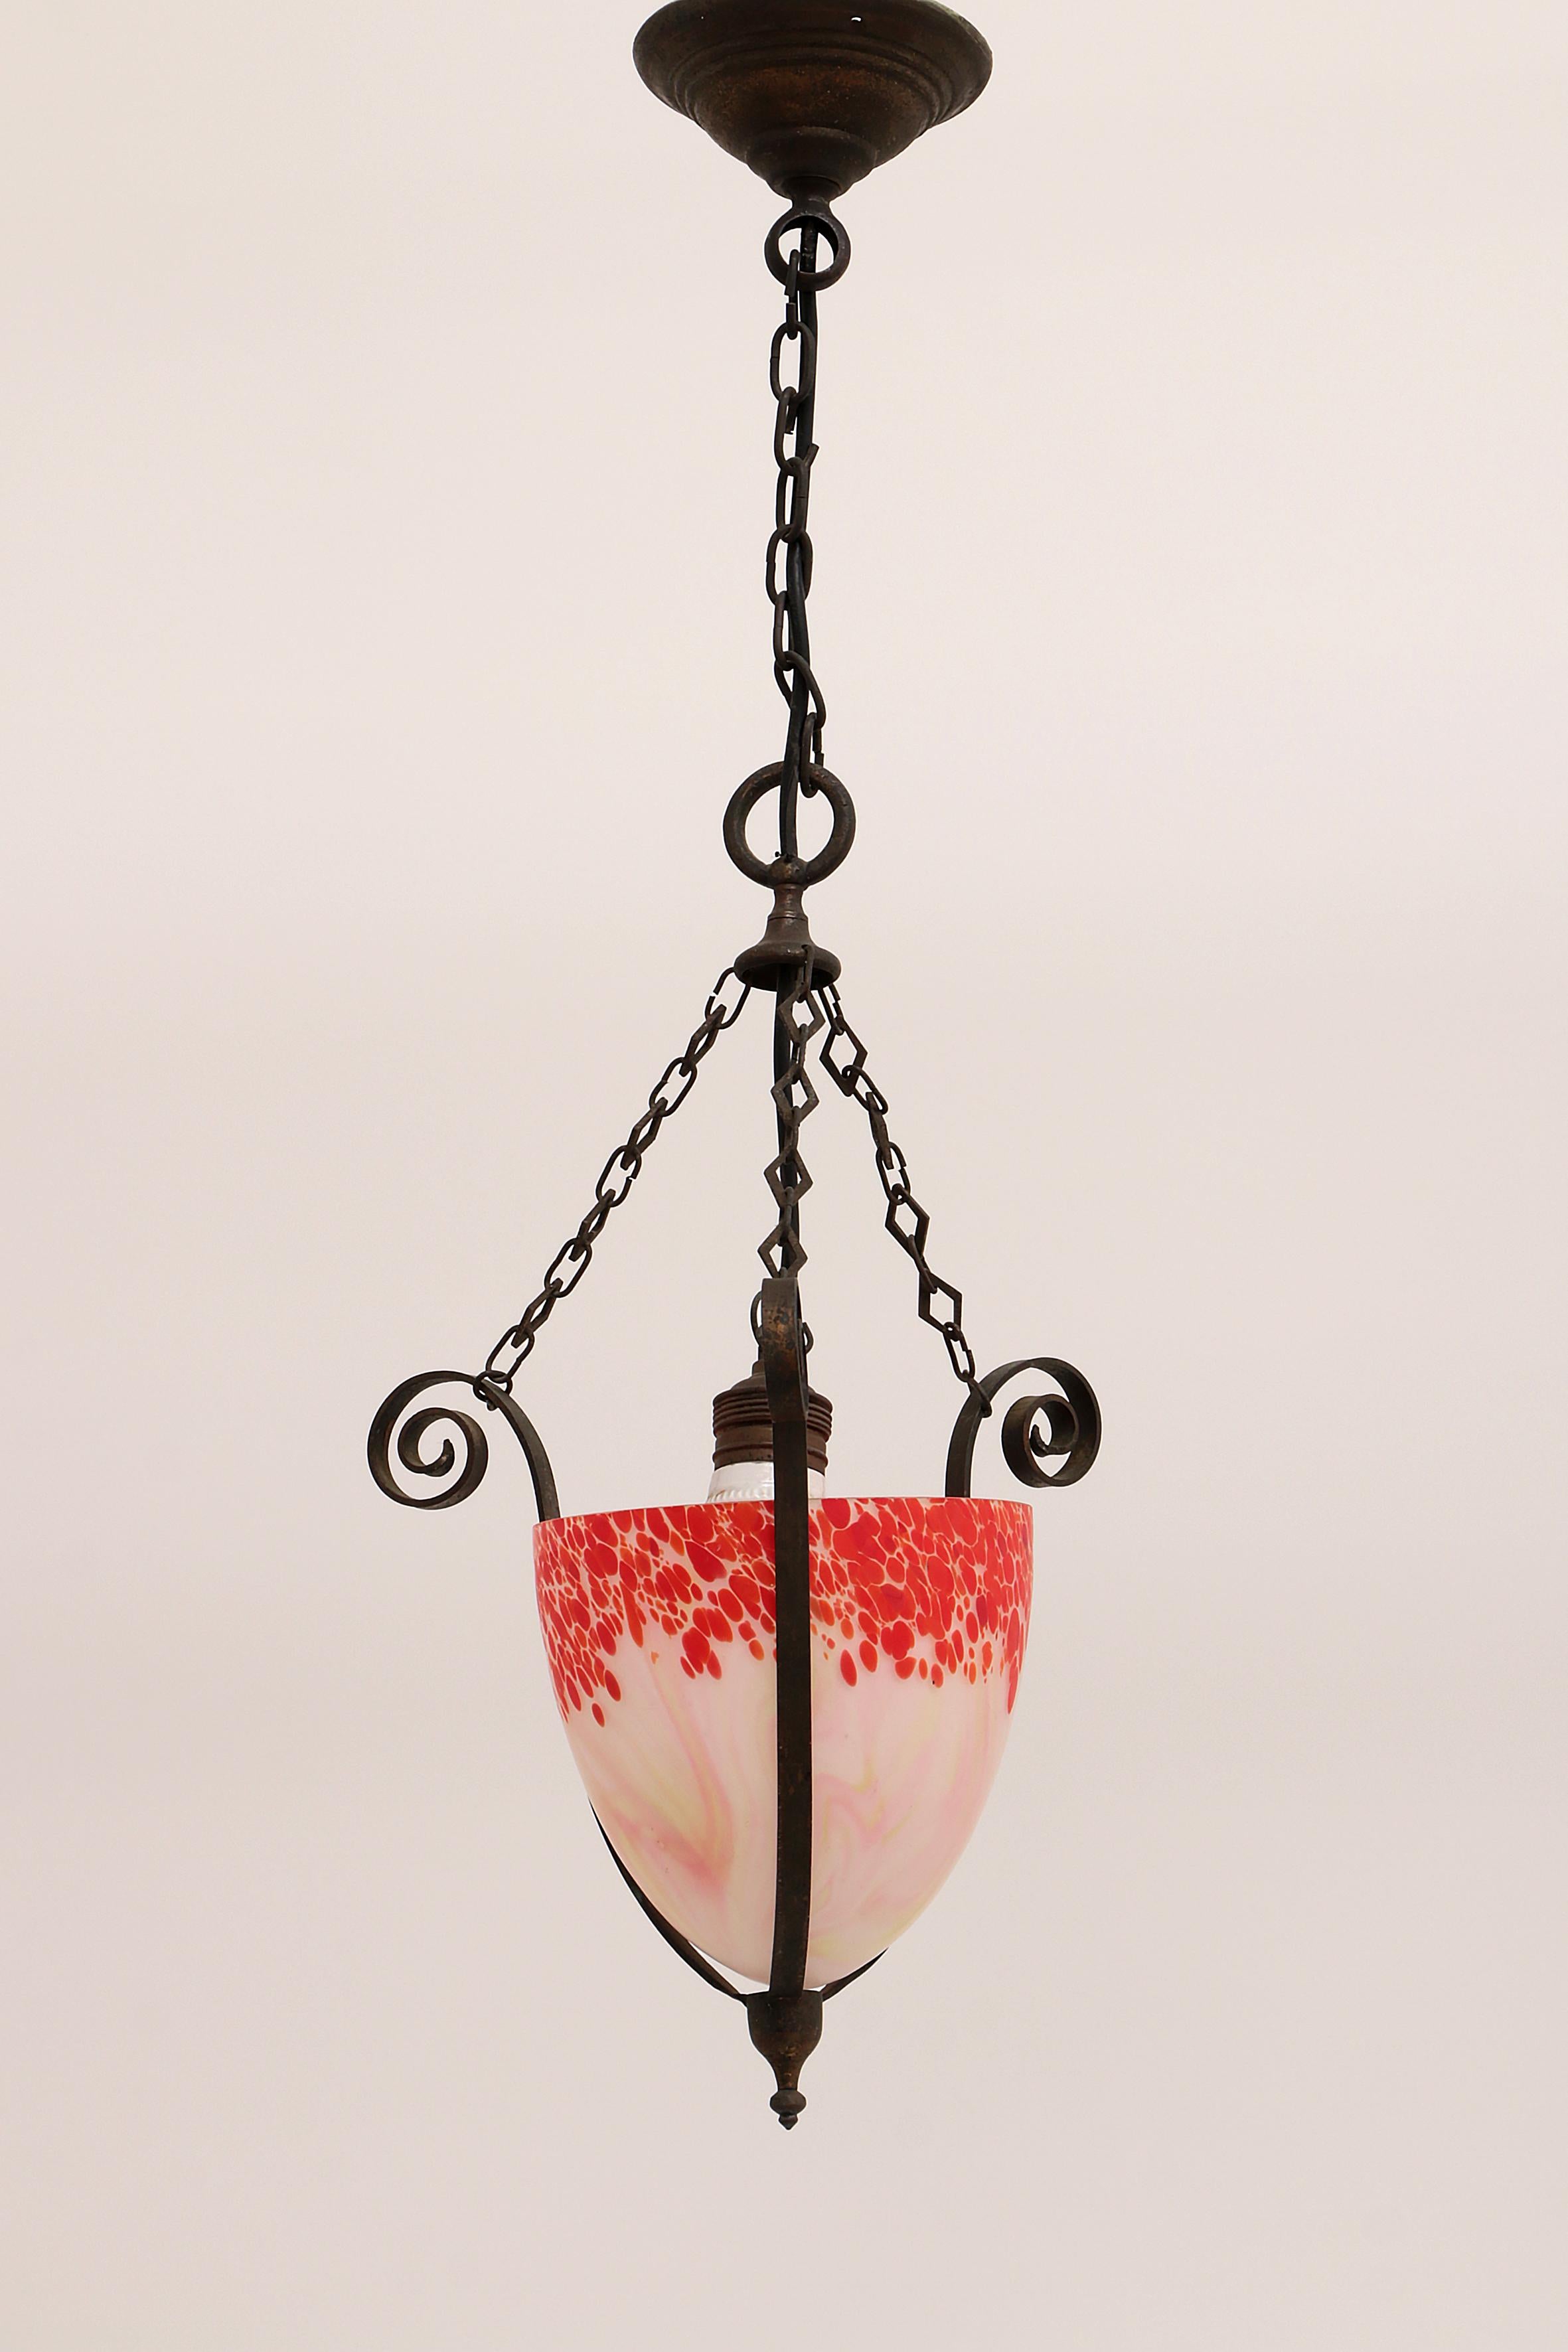 French Art Deco Hanging Lamp Charles Schneider, 1930, France